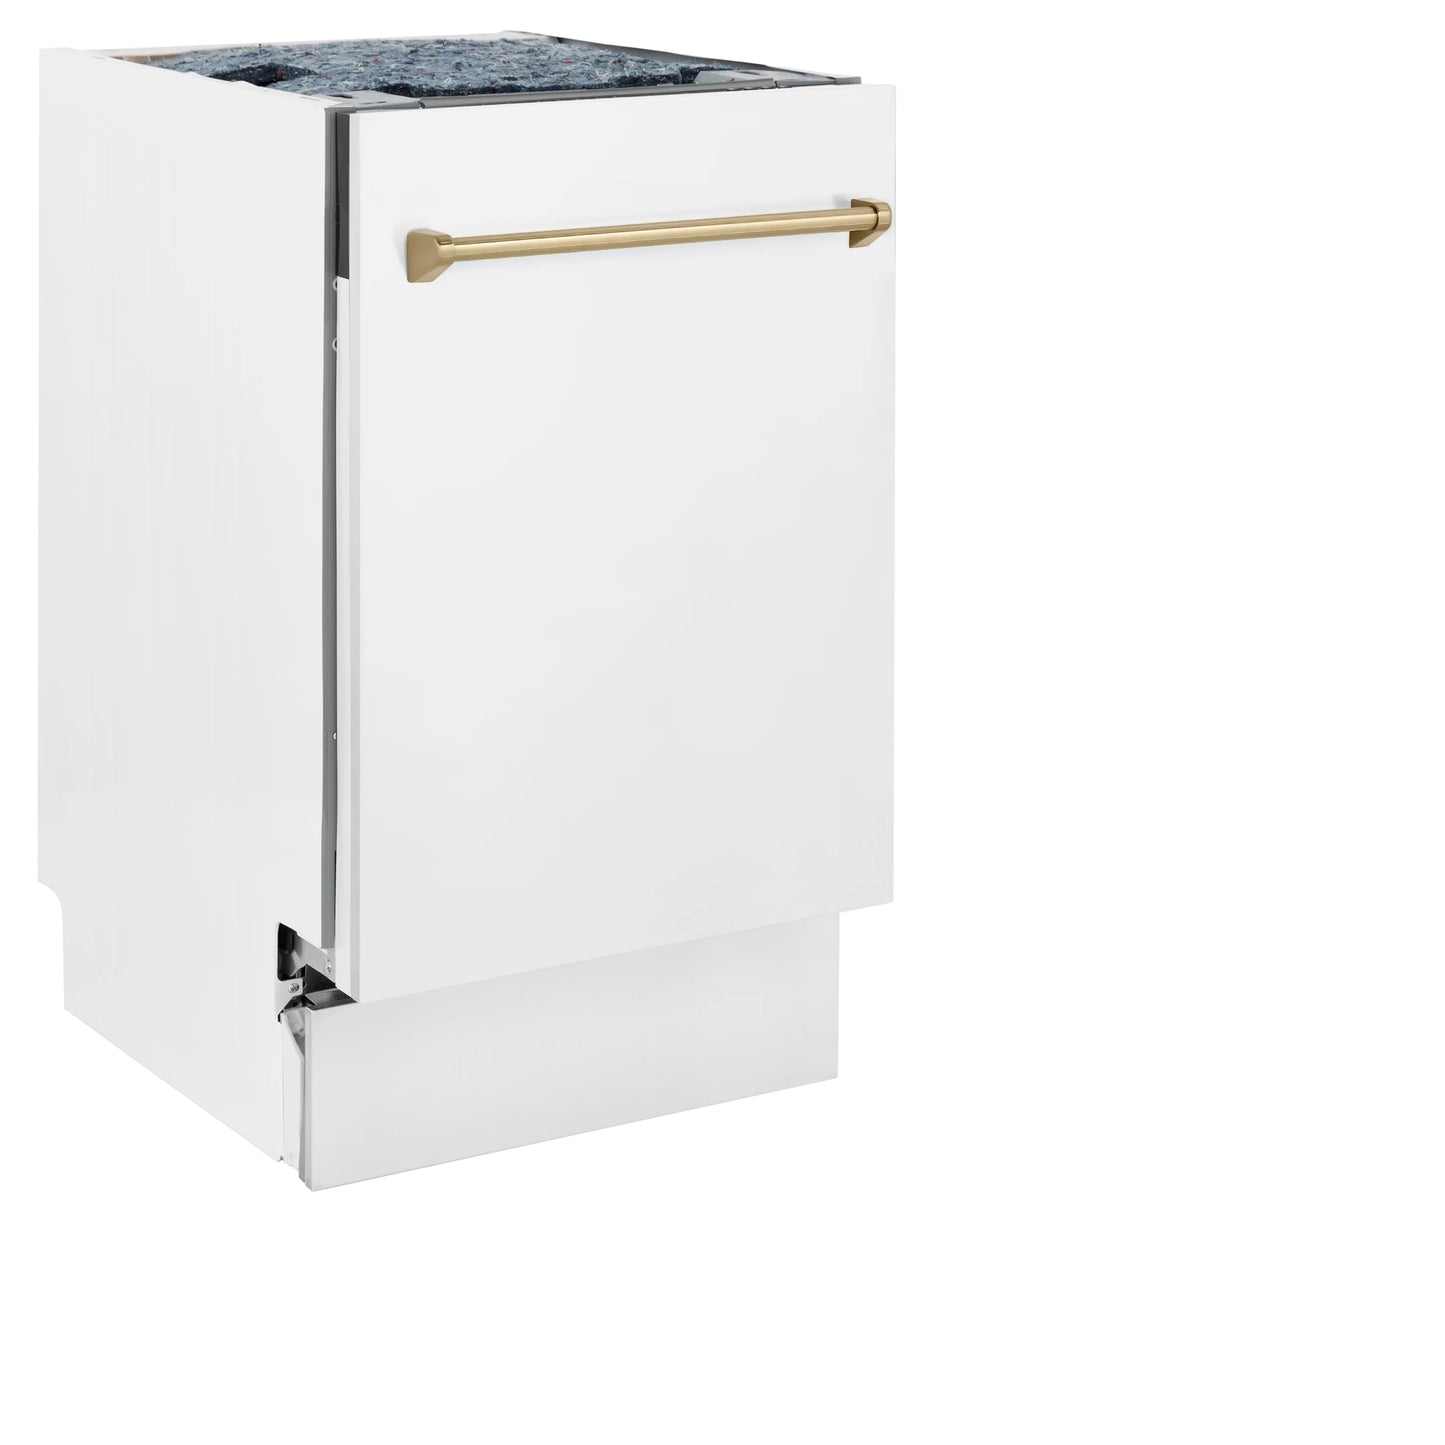 ZLINE Autograph Edition 18” Compact 3rd Rack Top Control Dishwasher in White Matte with Champagne Bronze Accent Handle, 51dBa (DWVZ-WM-18-CB)